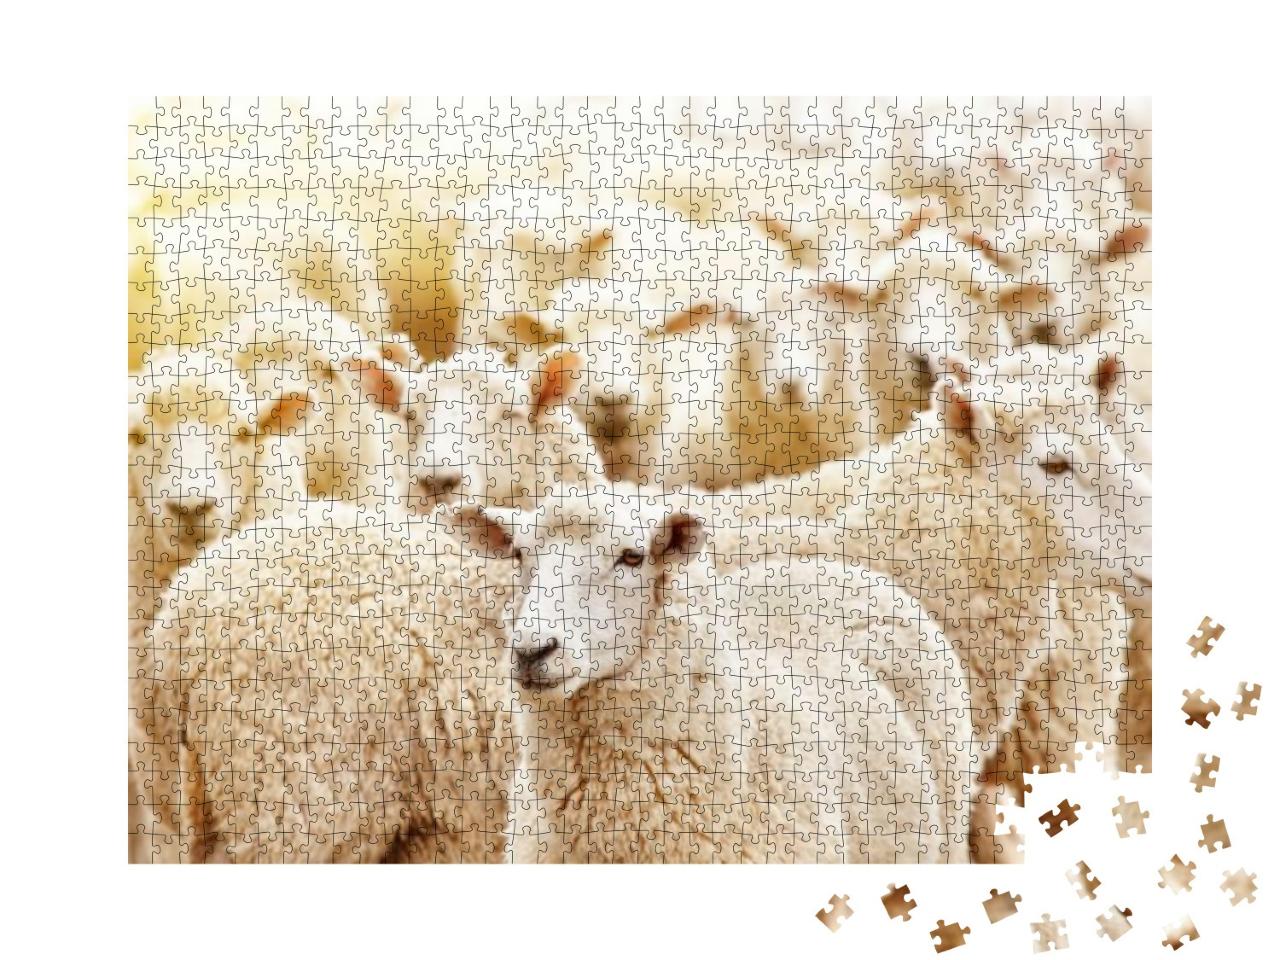 Livestock Farm, Flock of Sheep... Jigsaw Puzzle with 1000 pieces